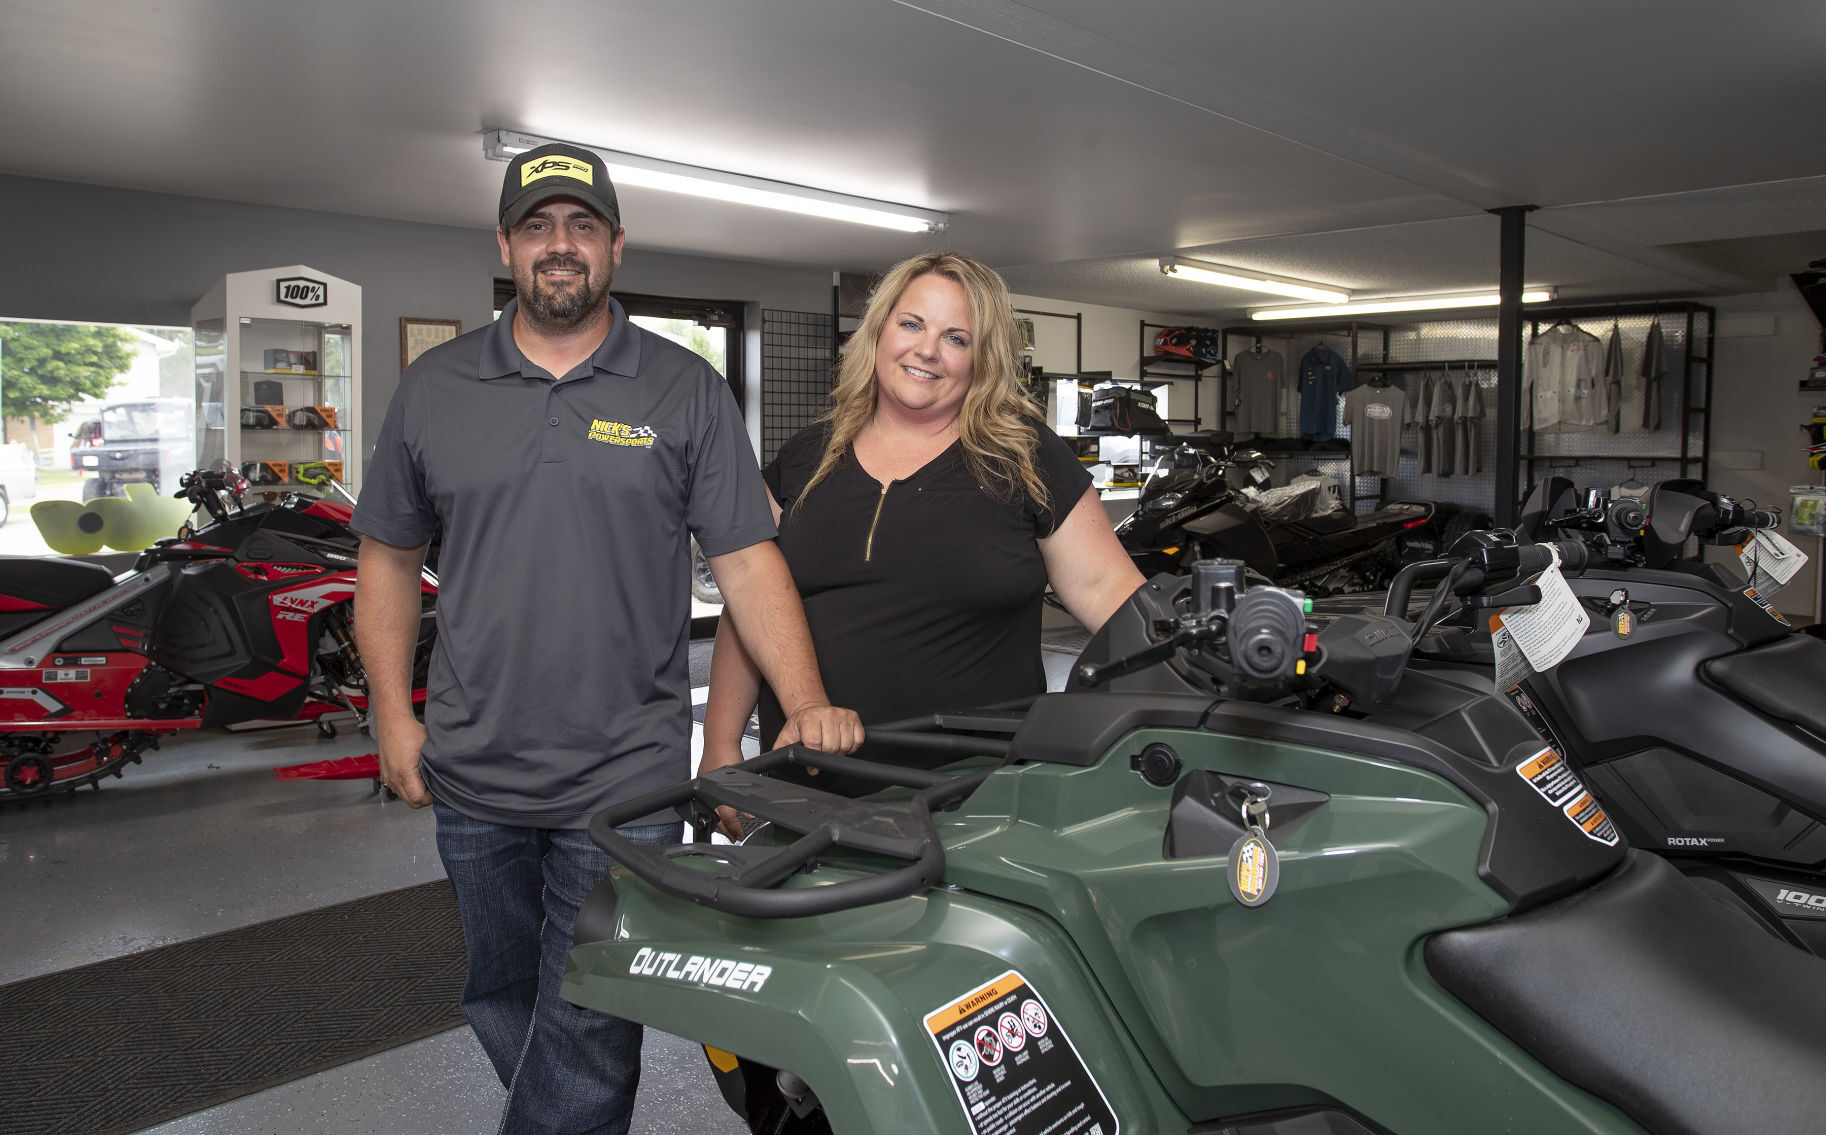 Nick and Jessica Leibfried, the owners of Nick’s Powersports, appear at the business’ current location at 315 N. Main St. in Dickeyville, Wis.    PHOTO CREDIT: Stephen Gassman, Telegraph Herald